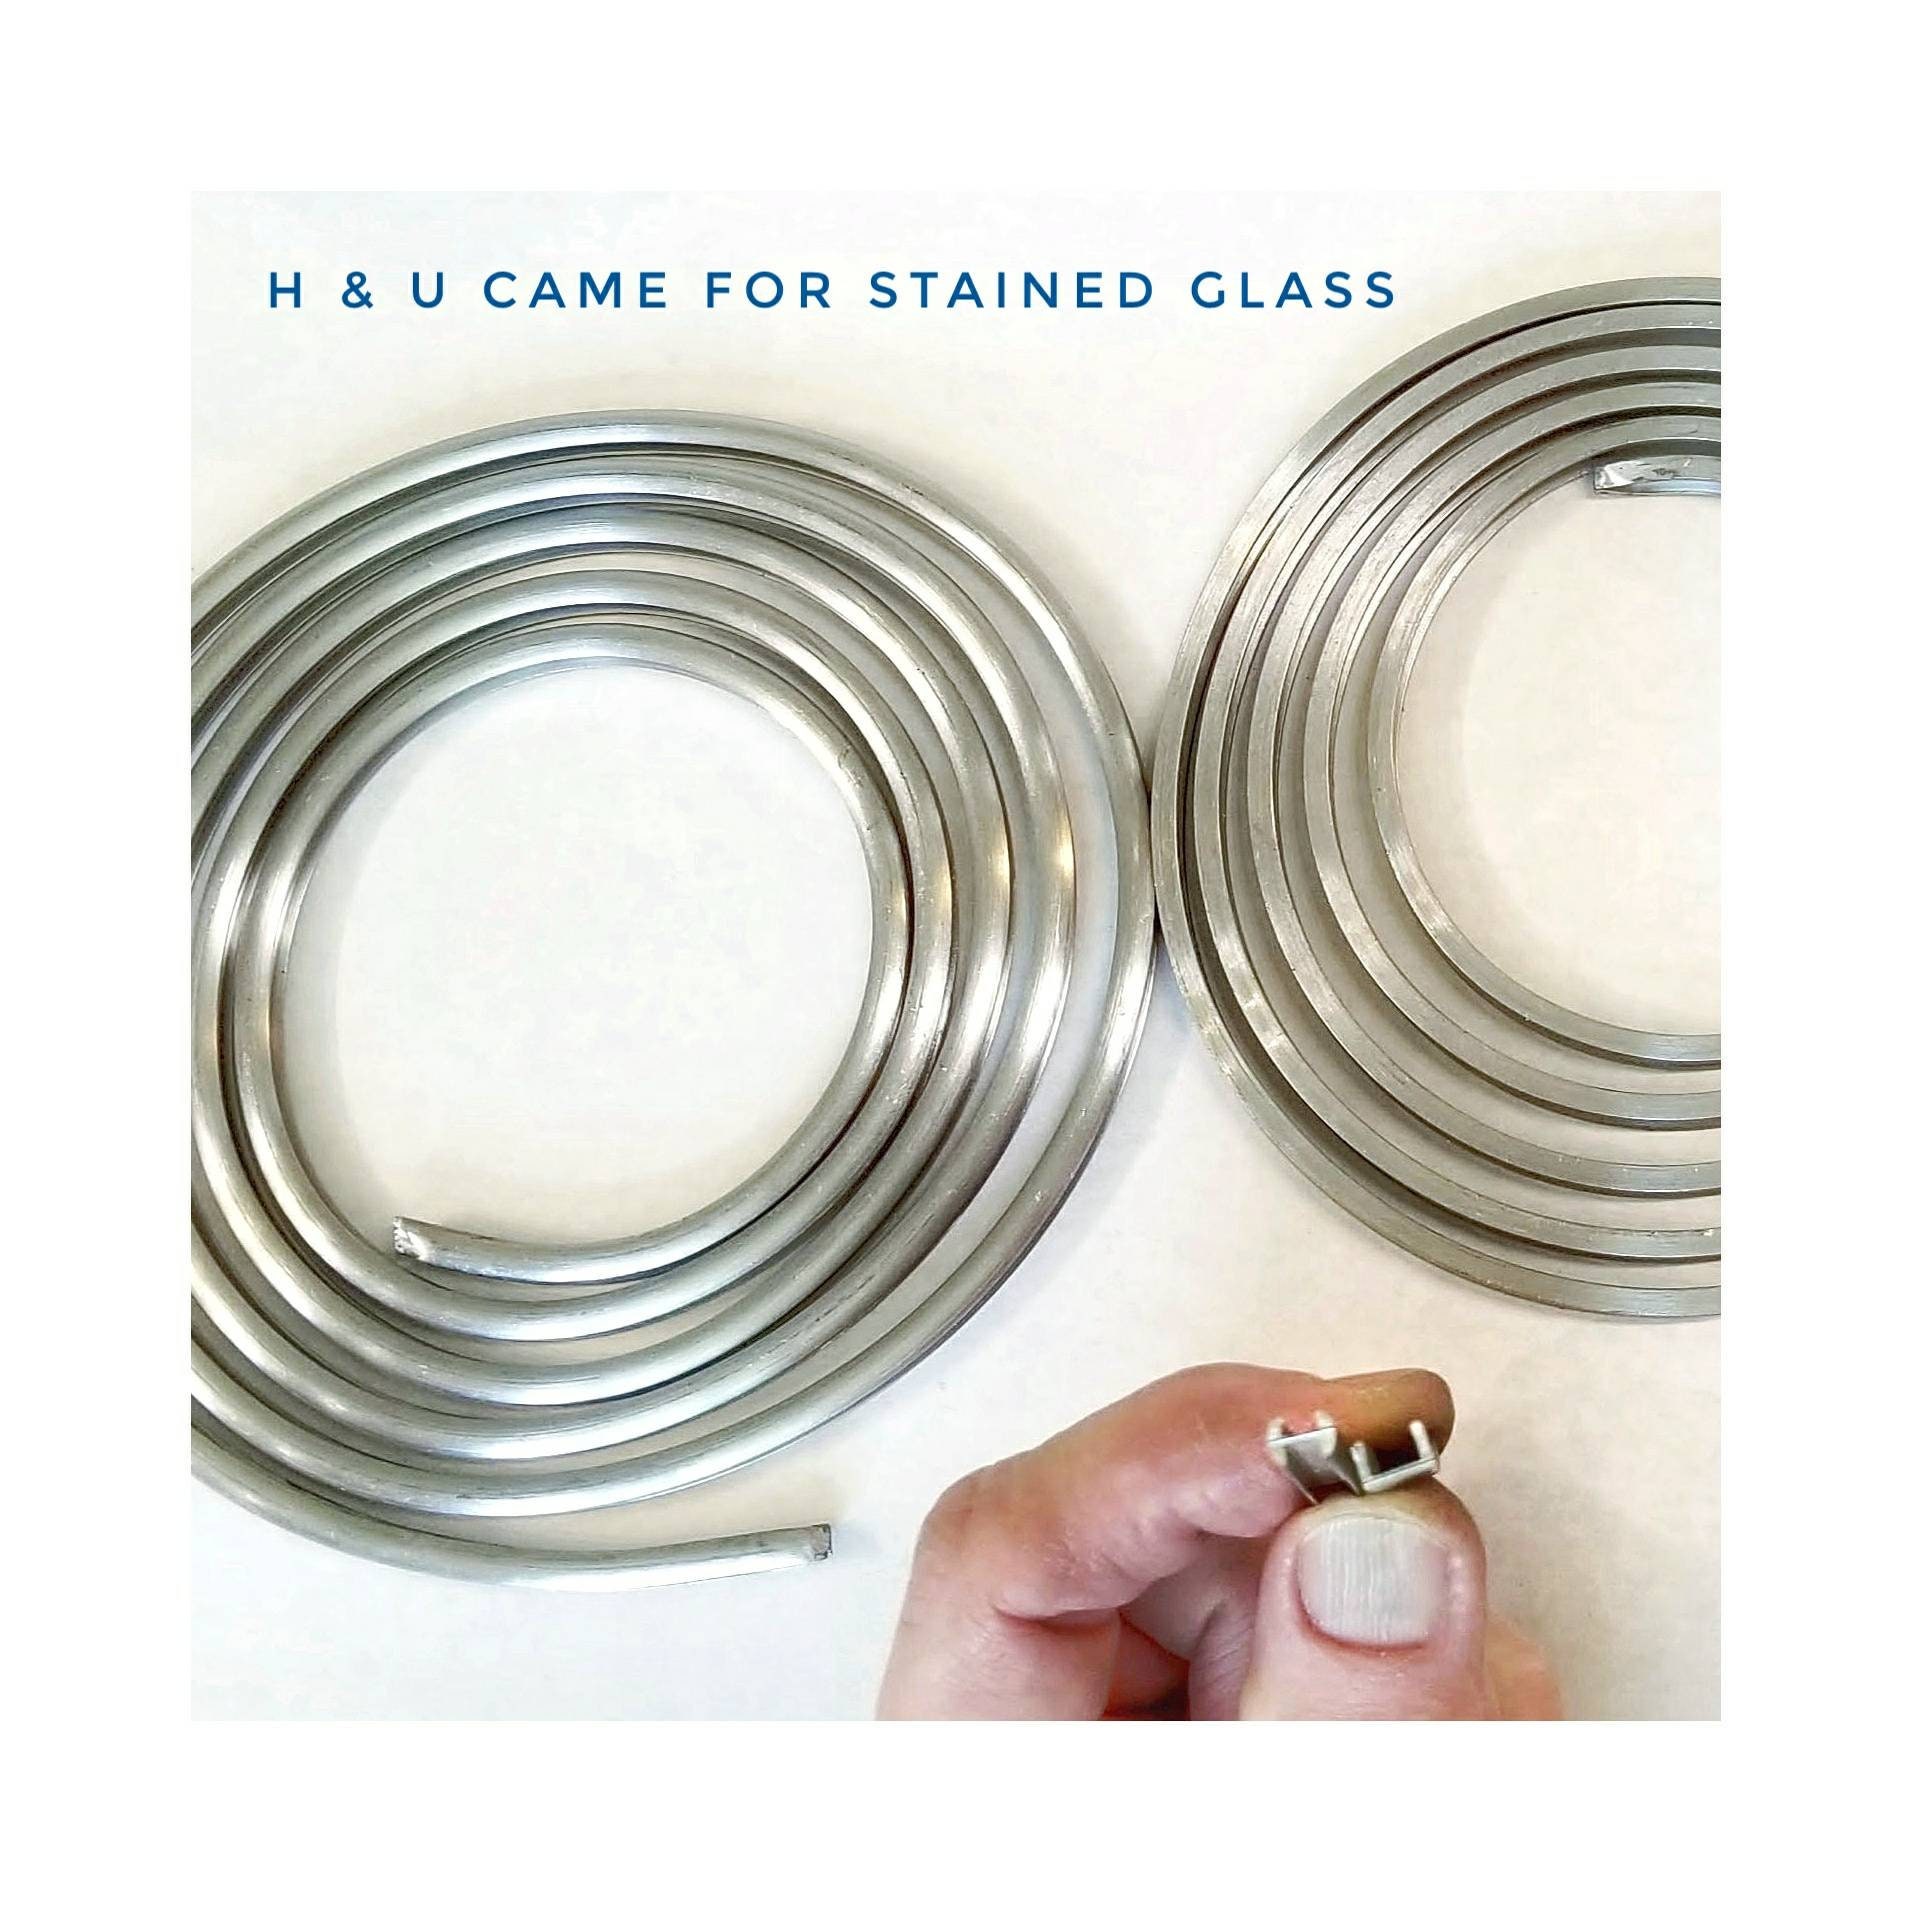 Stained Glass Supplies, Aluminum Push Pins & Horseshoe Nails for